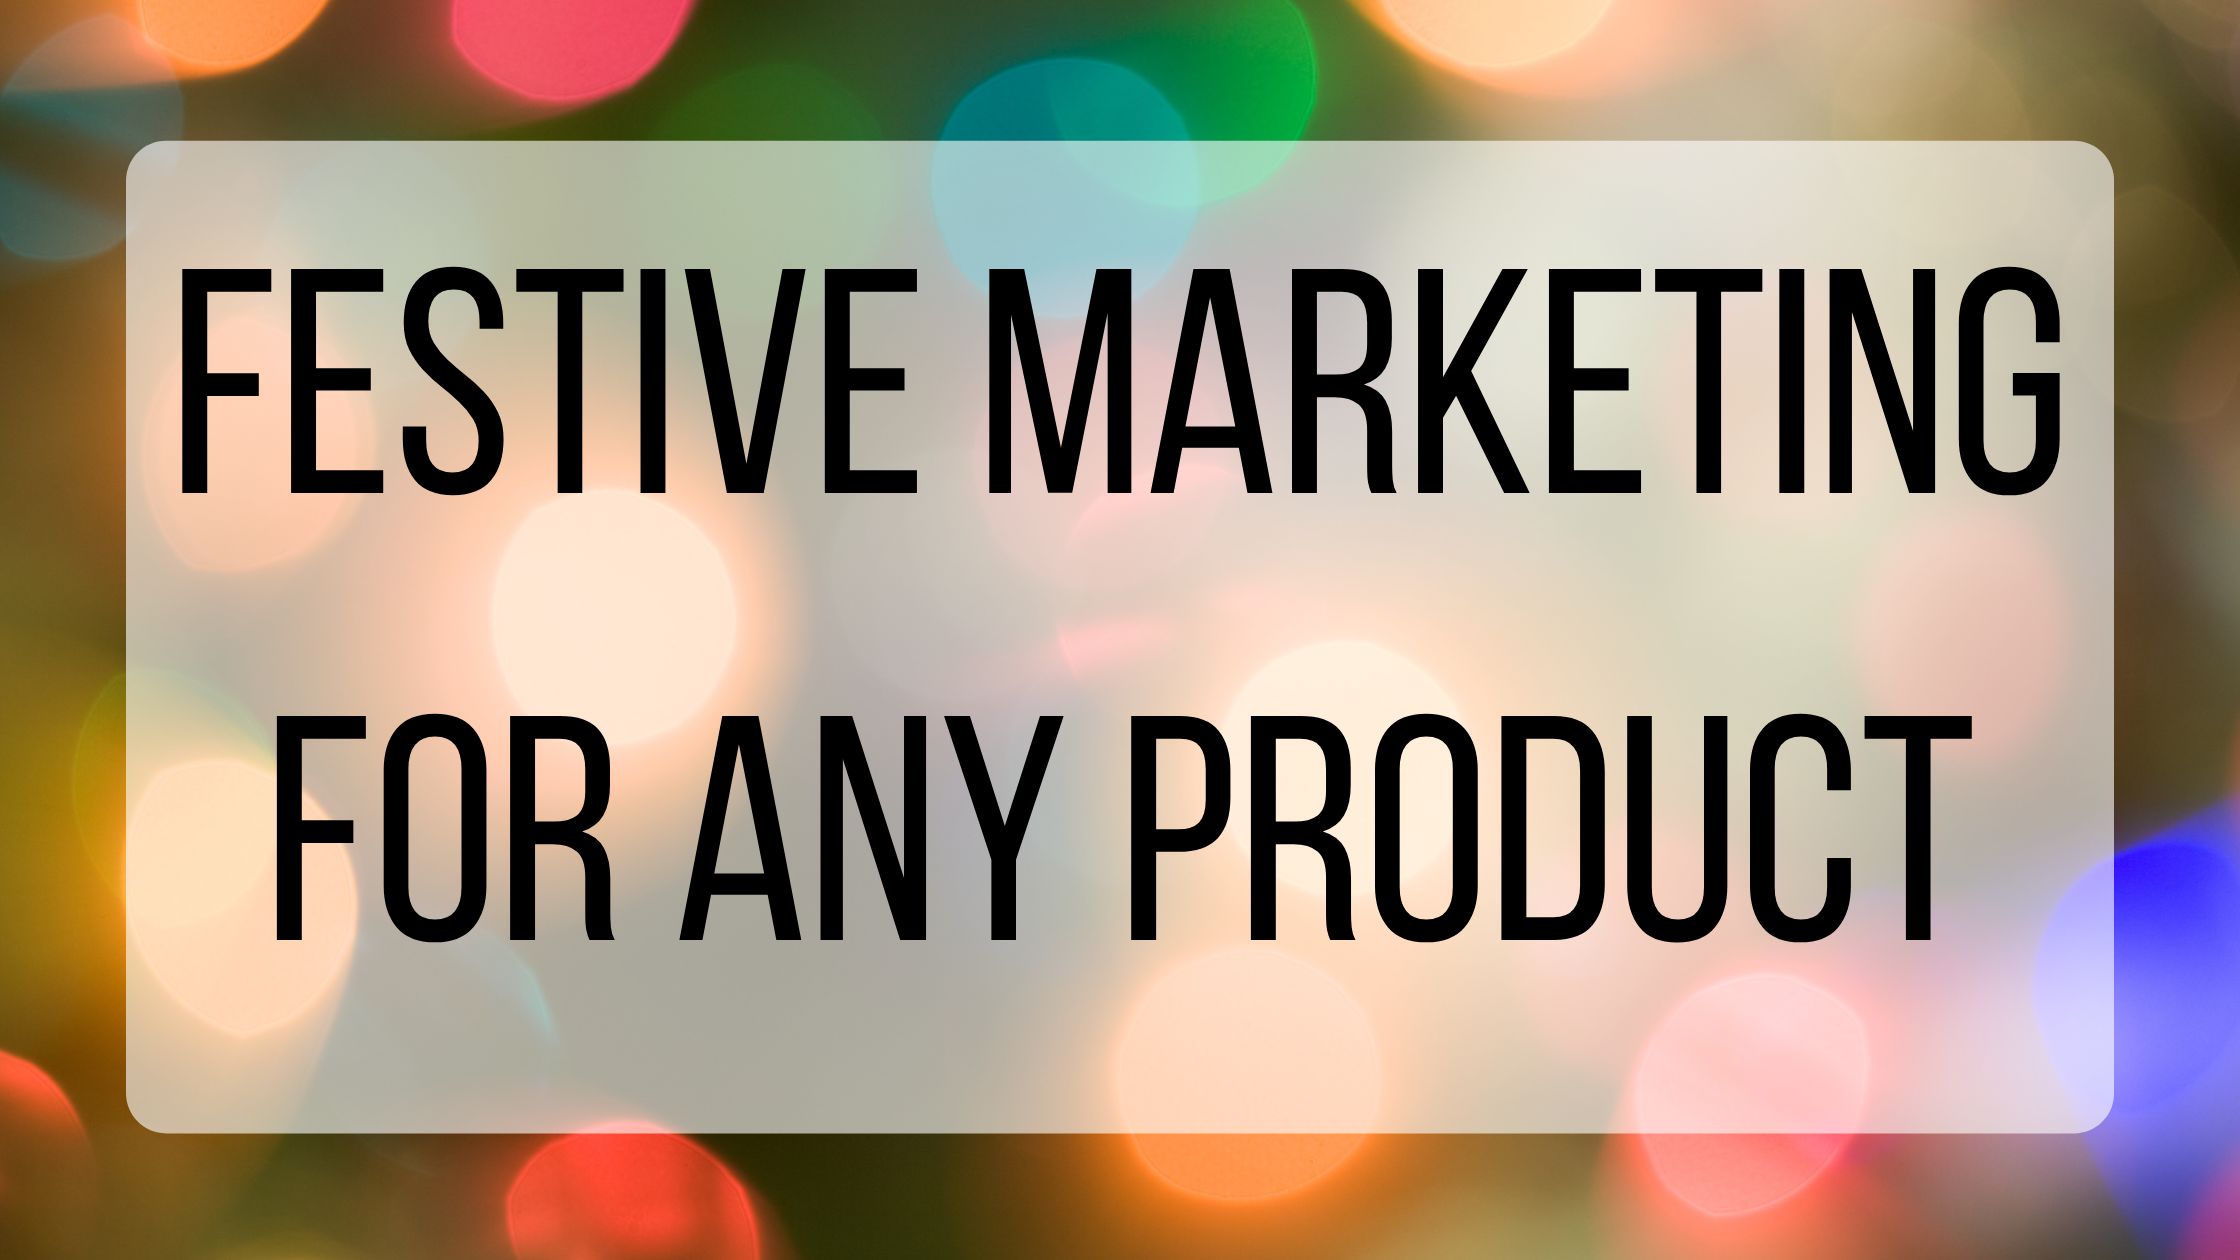 festive-marketing-for-any-product-bmt-micro-blog